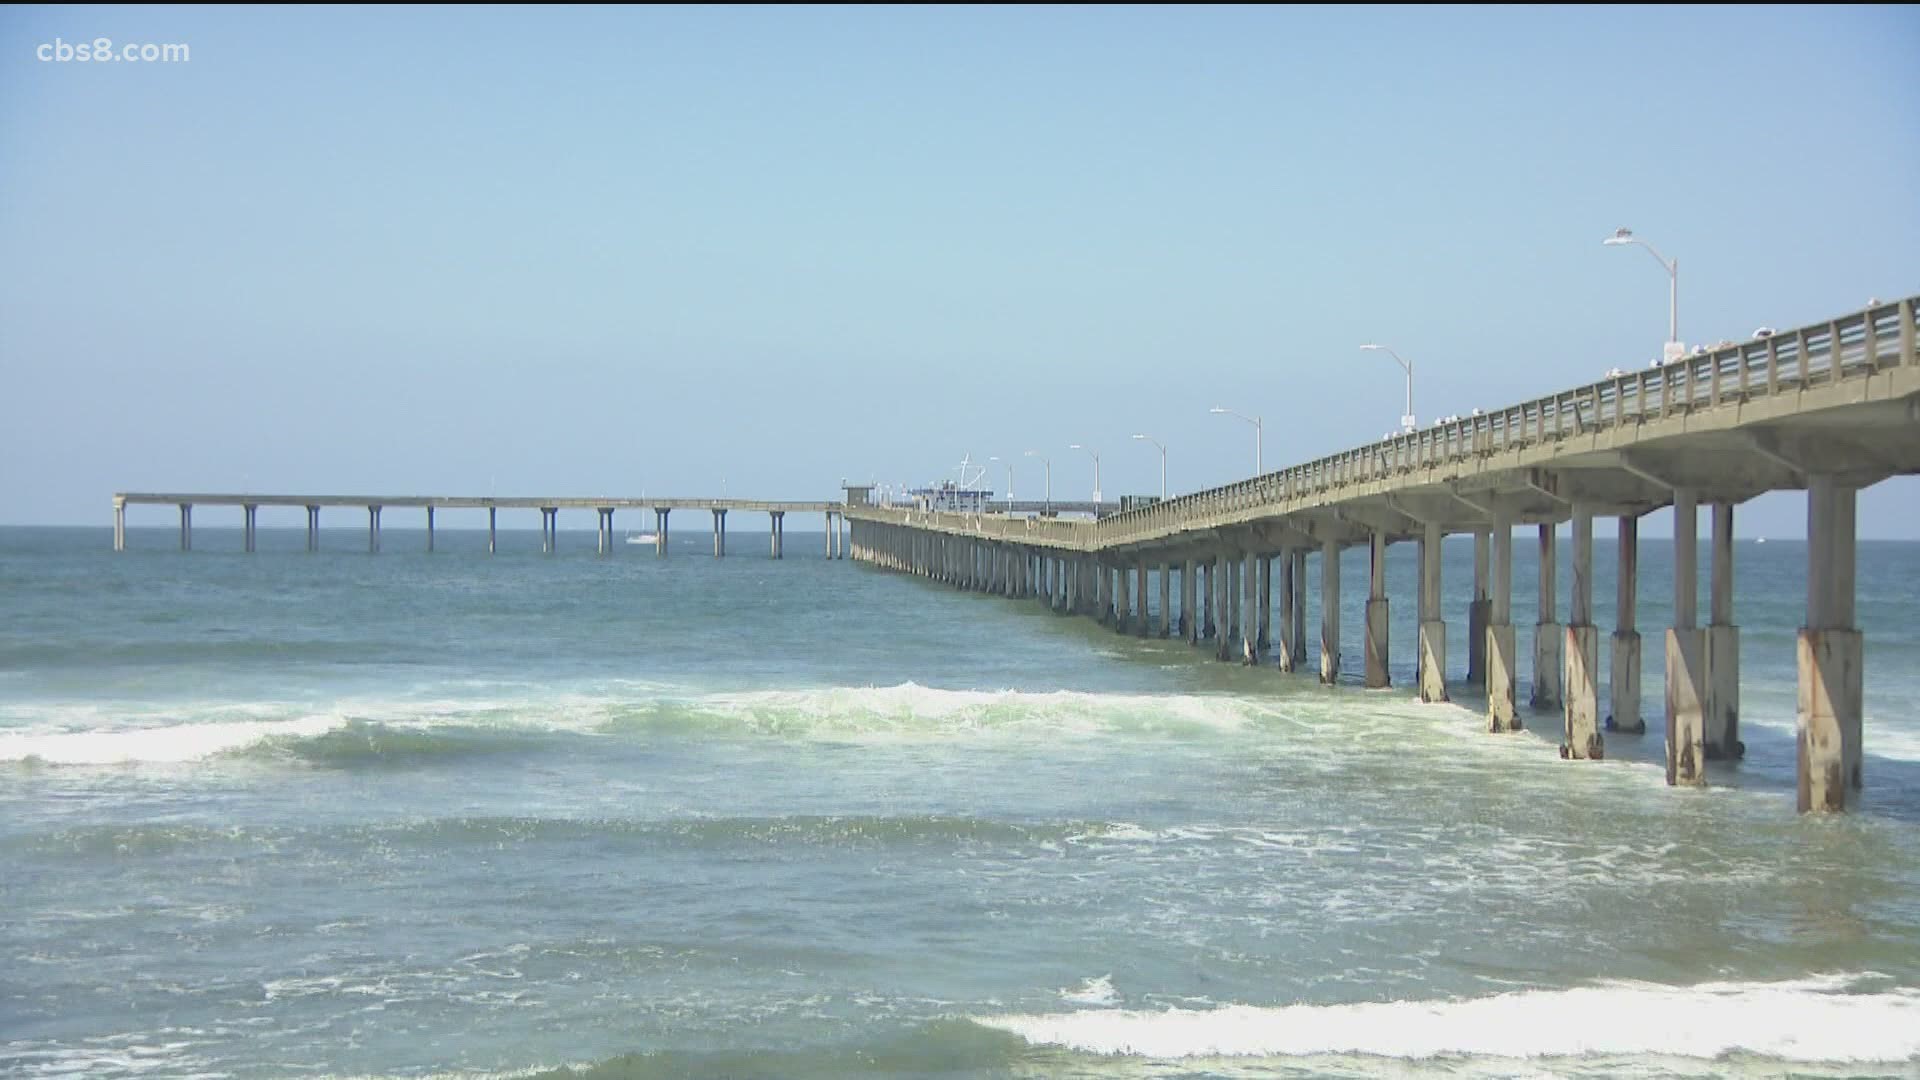 After a brutal winter storm knocked out the guardrails, the city commissioned engineering firm Moffett and Nichol to do a report on the health of the pier.